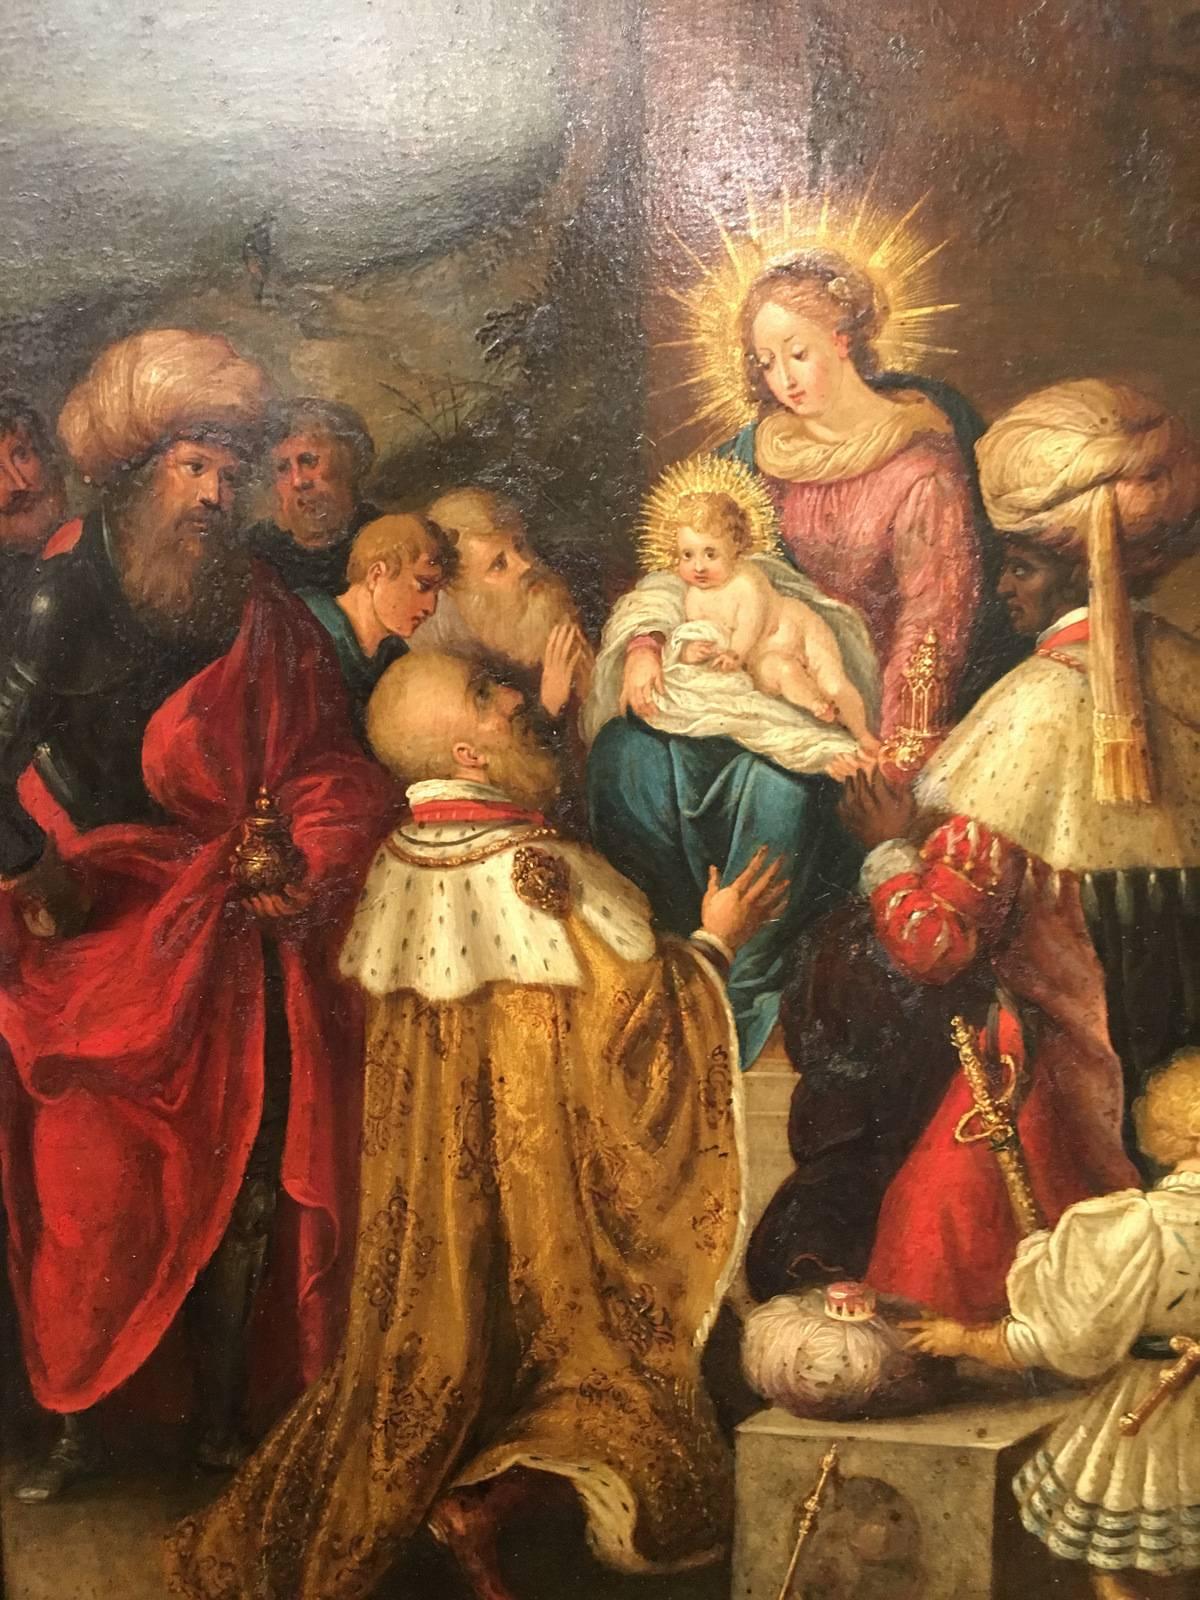 Baroque Adoration of the Three  Wise Men Represented as Kings, Oil on Copper, Flanders